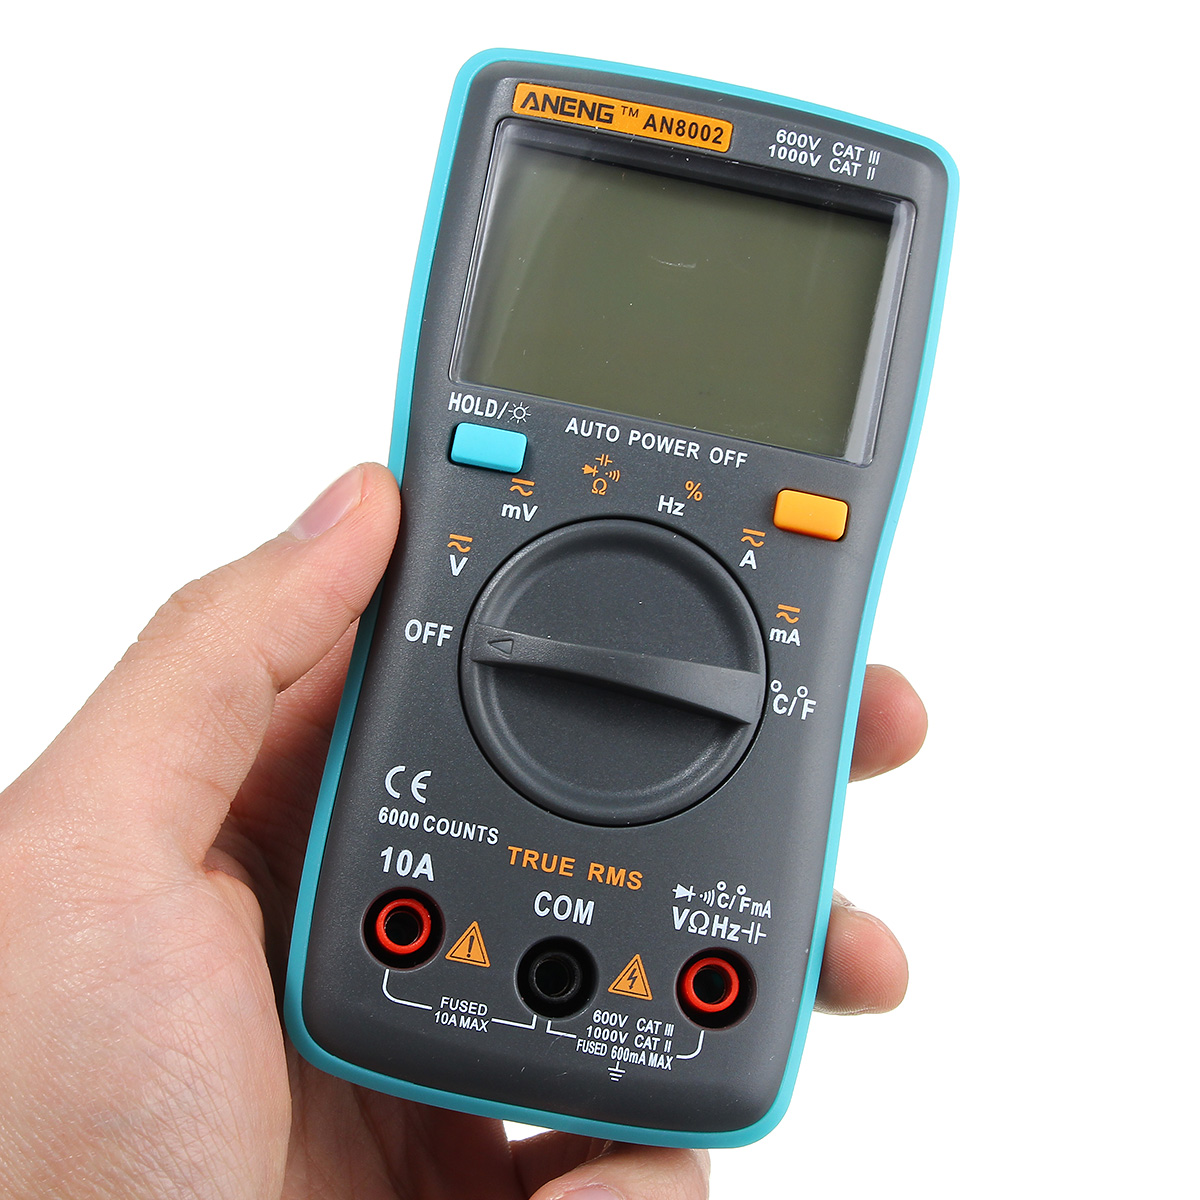 ANENG AN8002 Digital True RMS 6000 Counts Multimeter AC/DC Current Voltage Frequency Resistance Temperature Tester ℃/℉ 125